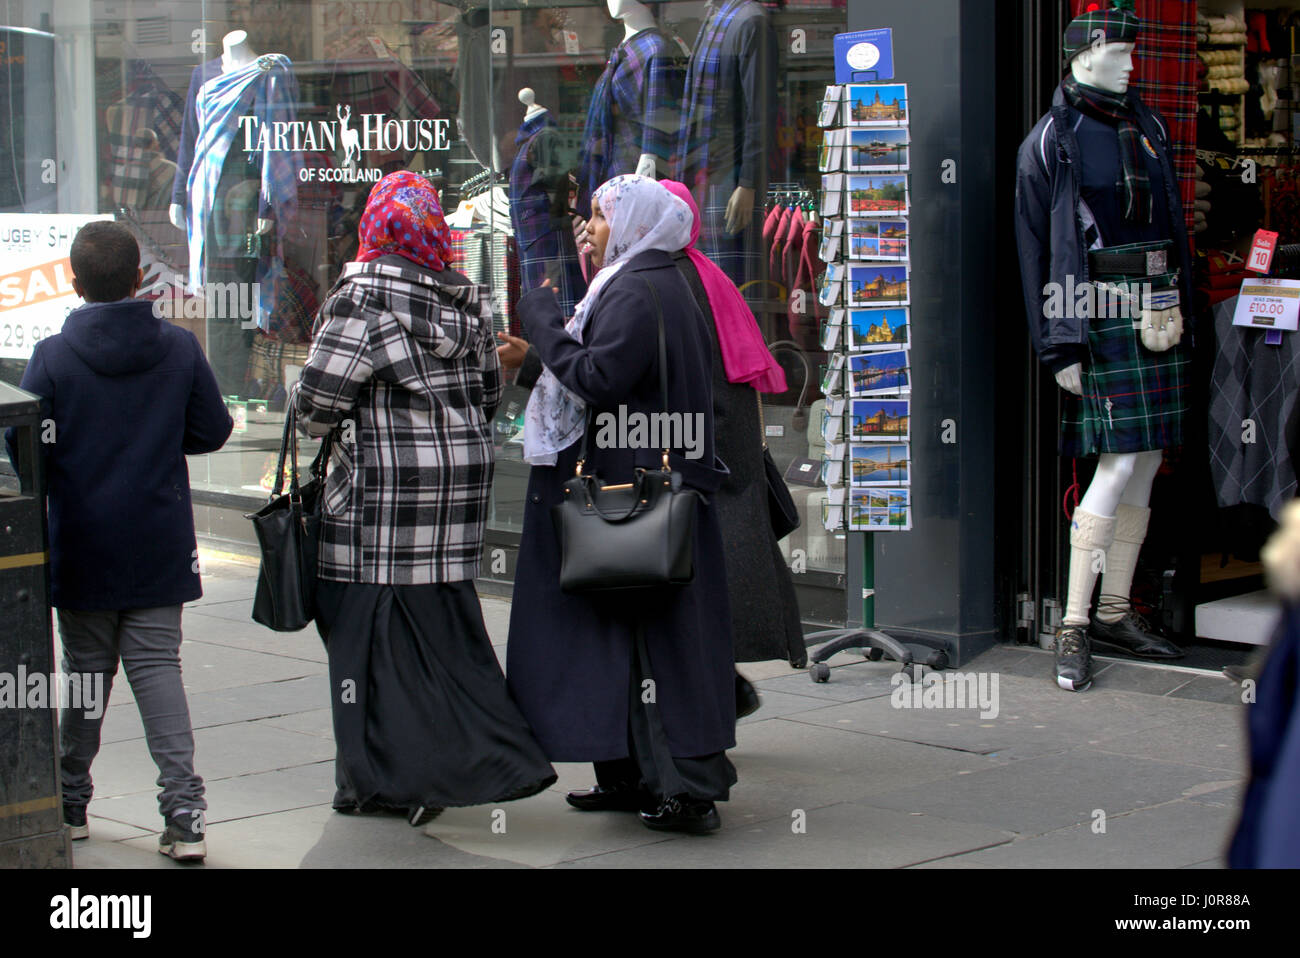 Asian African refugee dressed Hijab scarf on street in the UK everyday scene family walking in crowd with Scottish tartan memorabilia atound Stock Photo